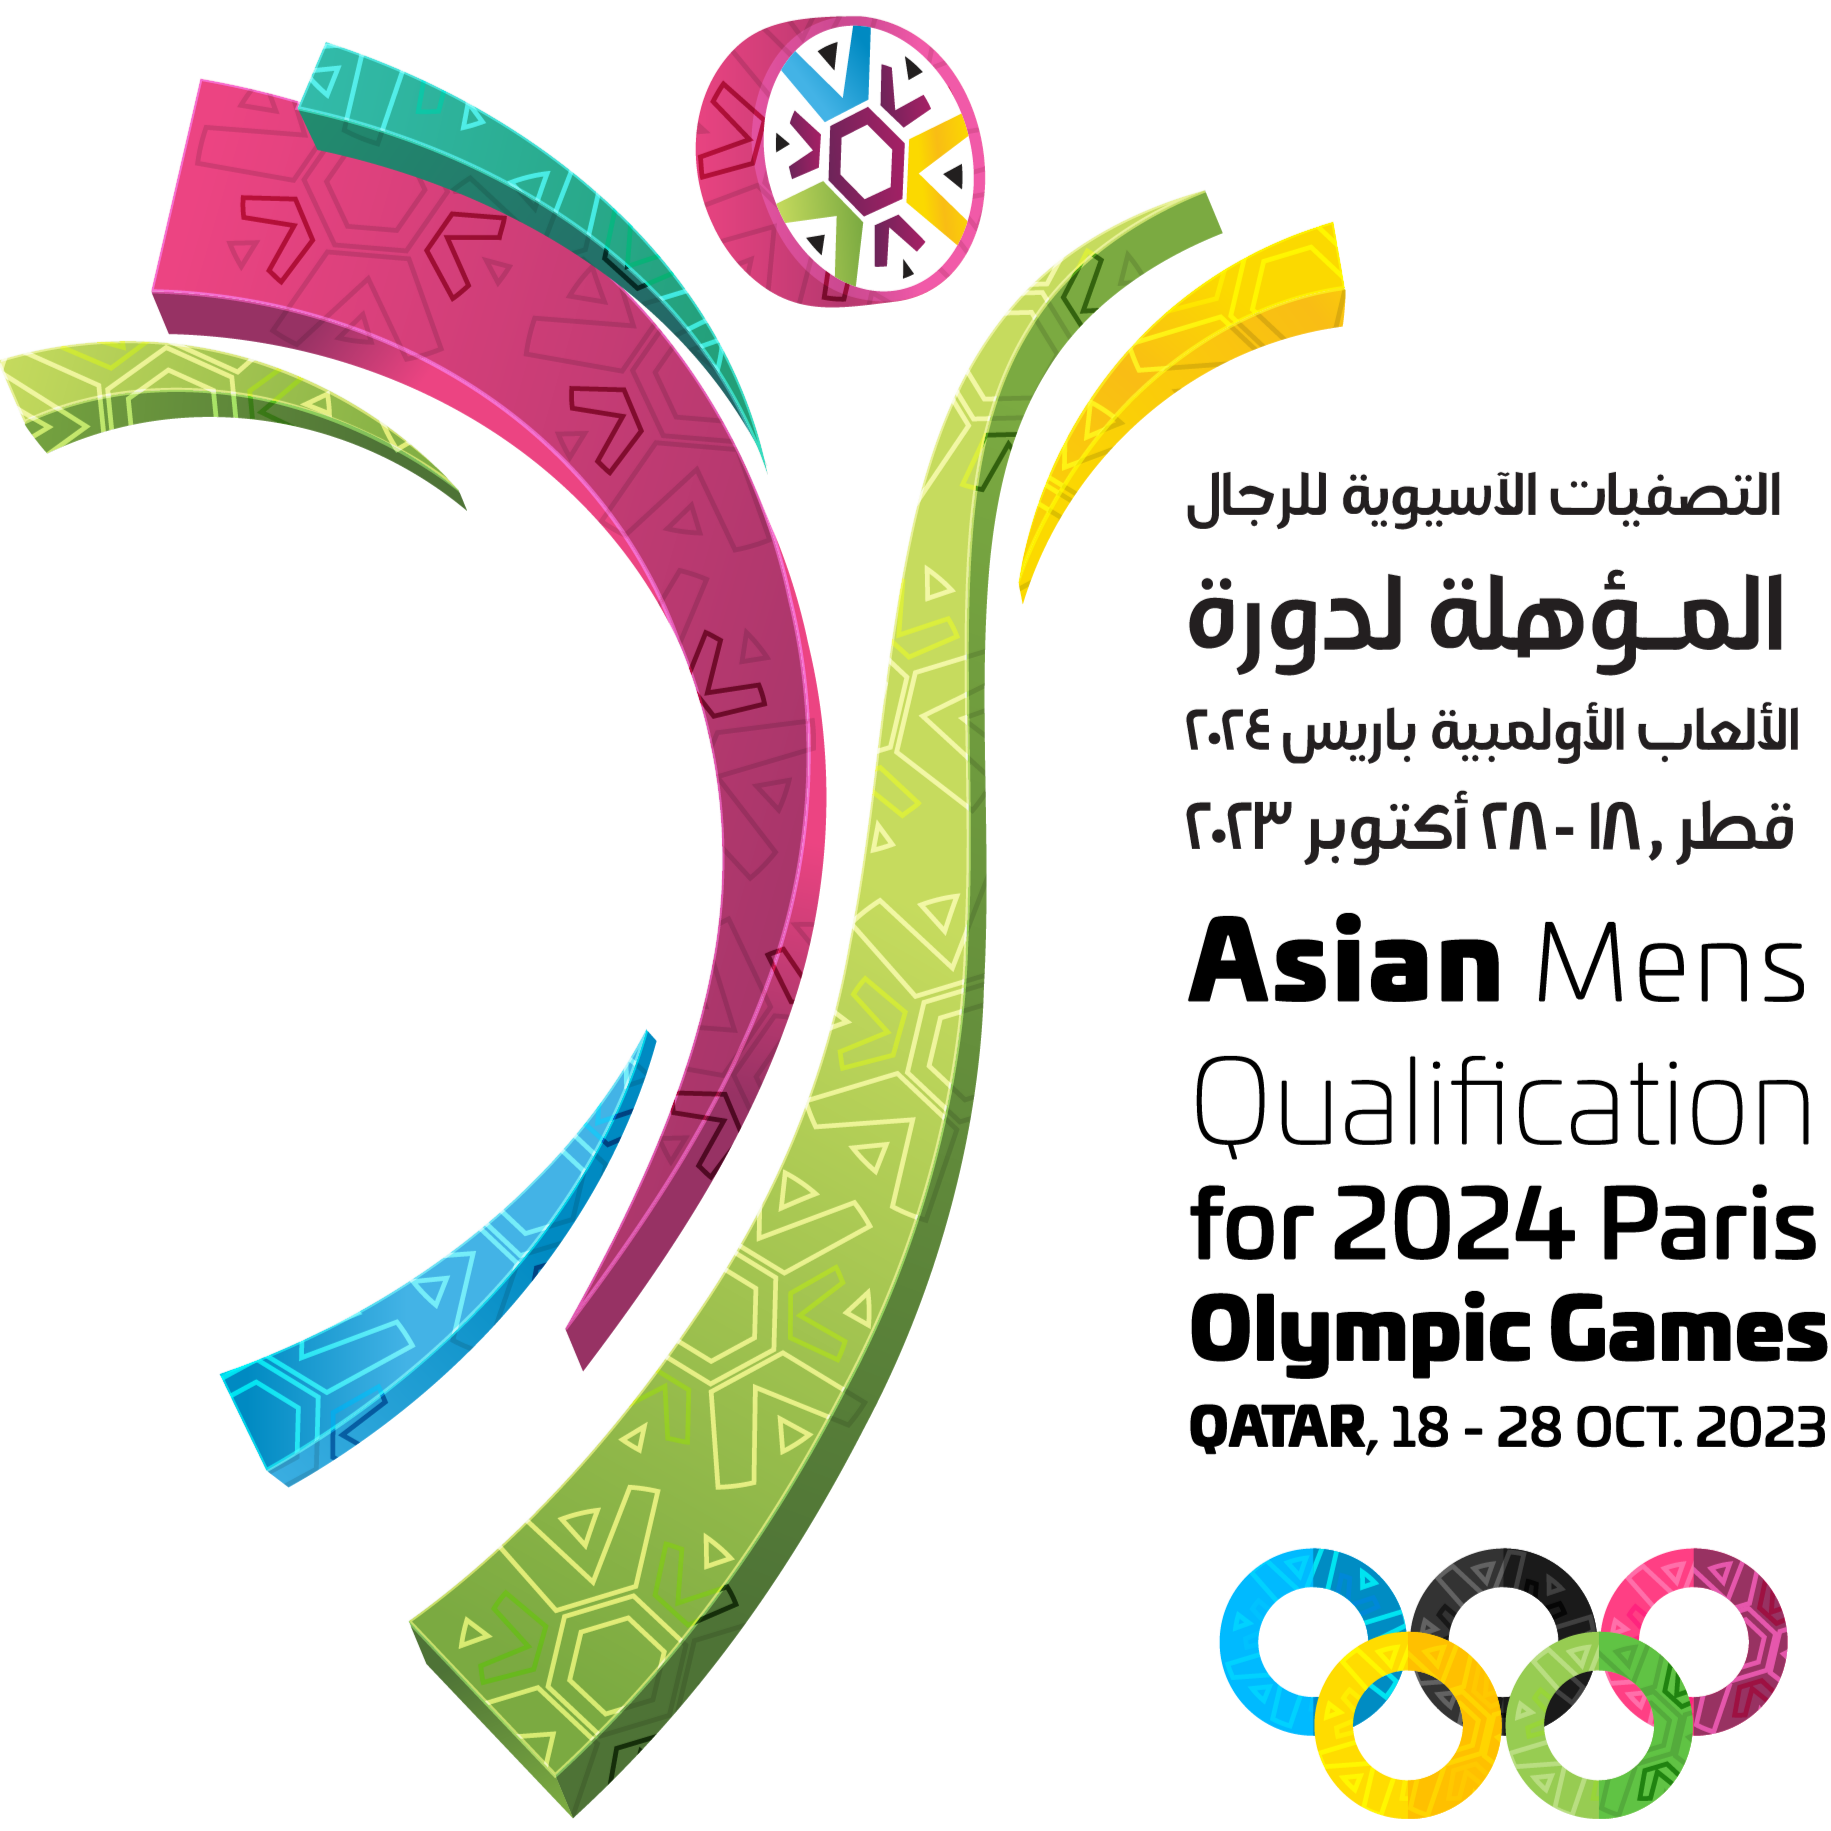 Match Schedule: Asian Men’s Handball Qualification for 2024 Olympic